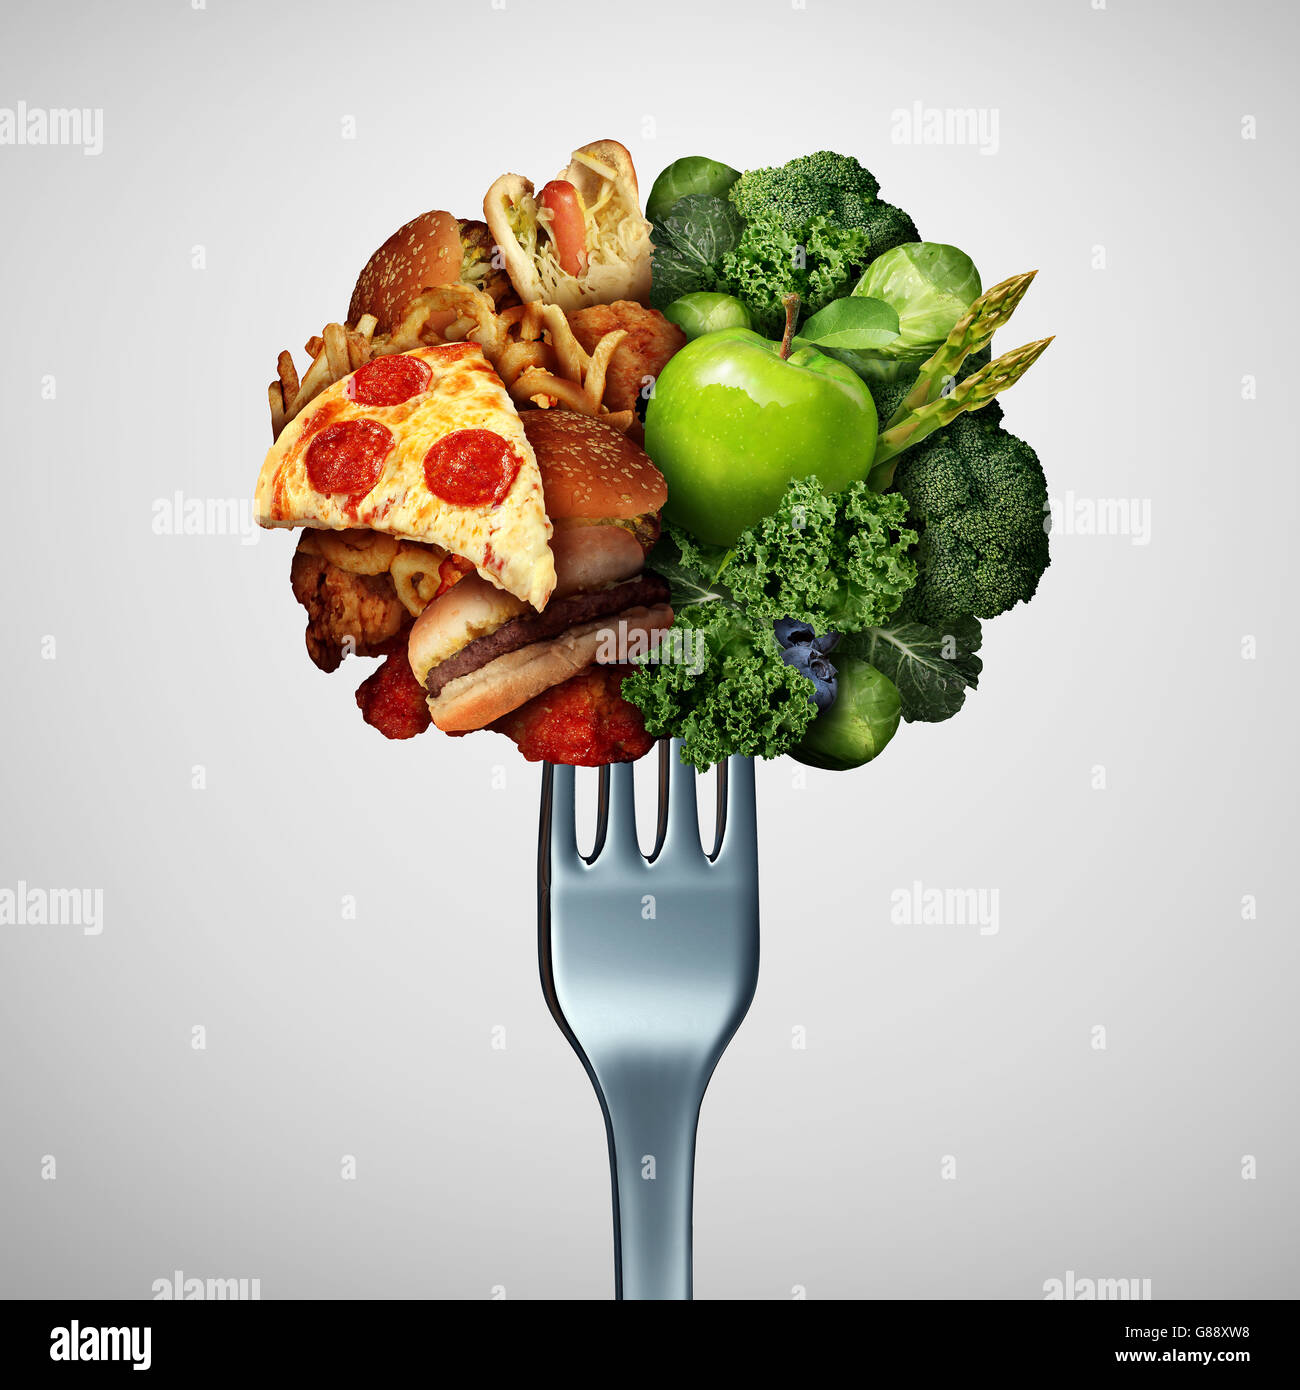 Food health options concept diet struggle and decision concept and nutrition choices dilemma between healthy good fresh fruit and vegetables or cholesterol rich fast food with one divided dinner fork with 3D illustration elements. Stock Photo